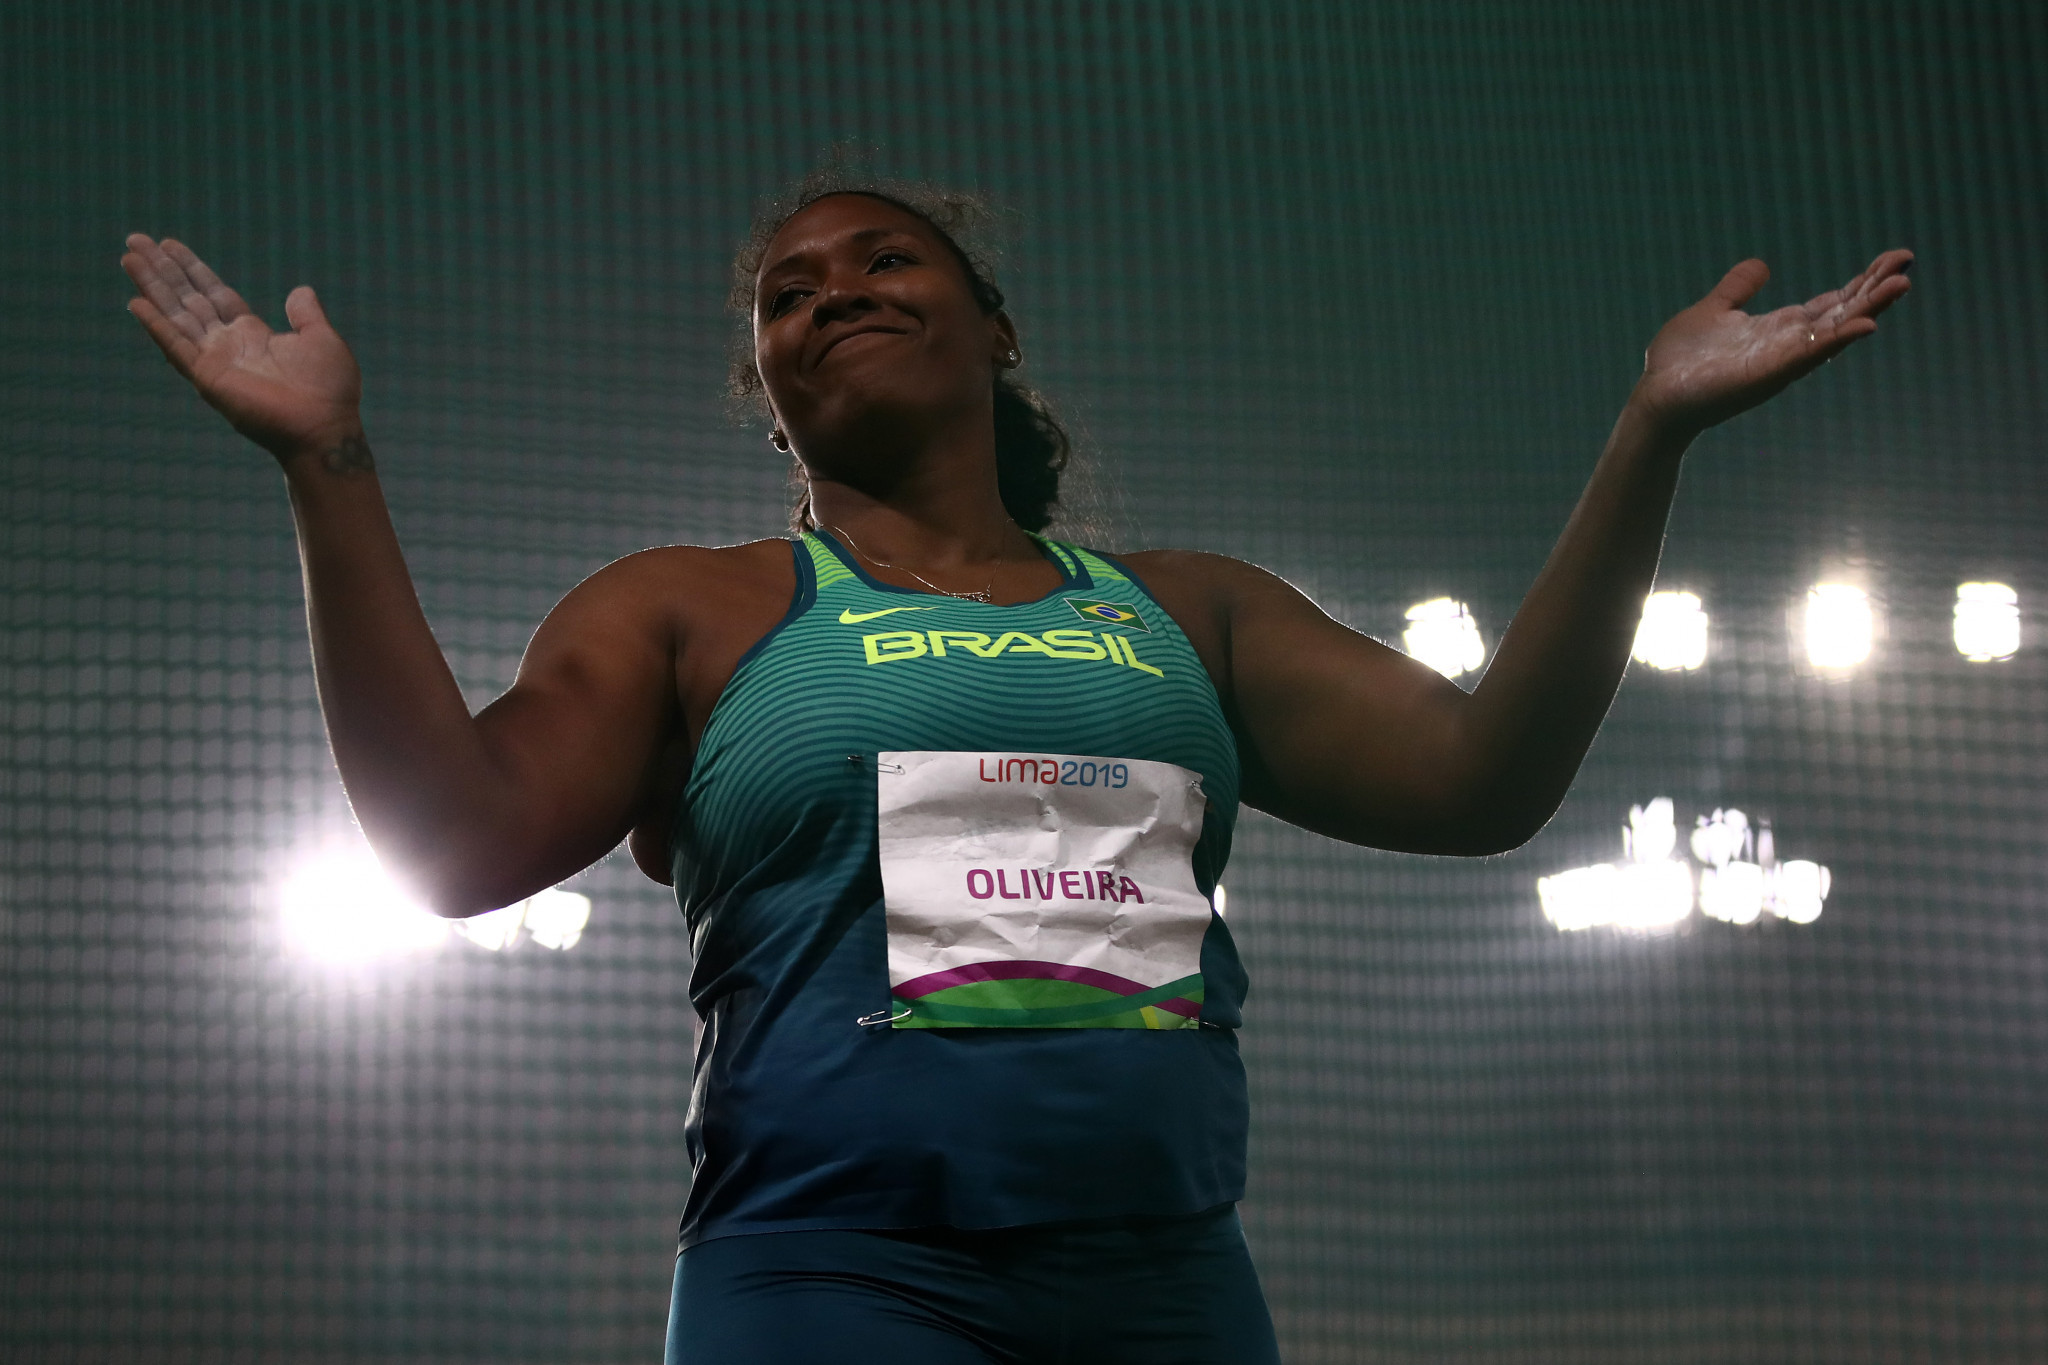 Lima 2019 discus silver medallist provisionally suspended after positive test